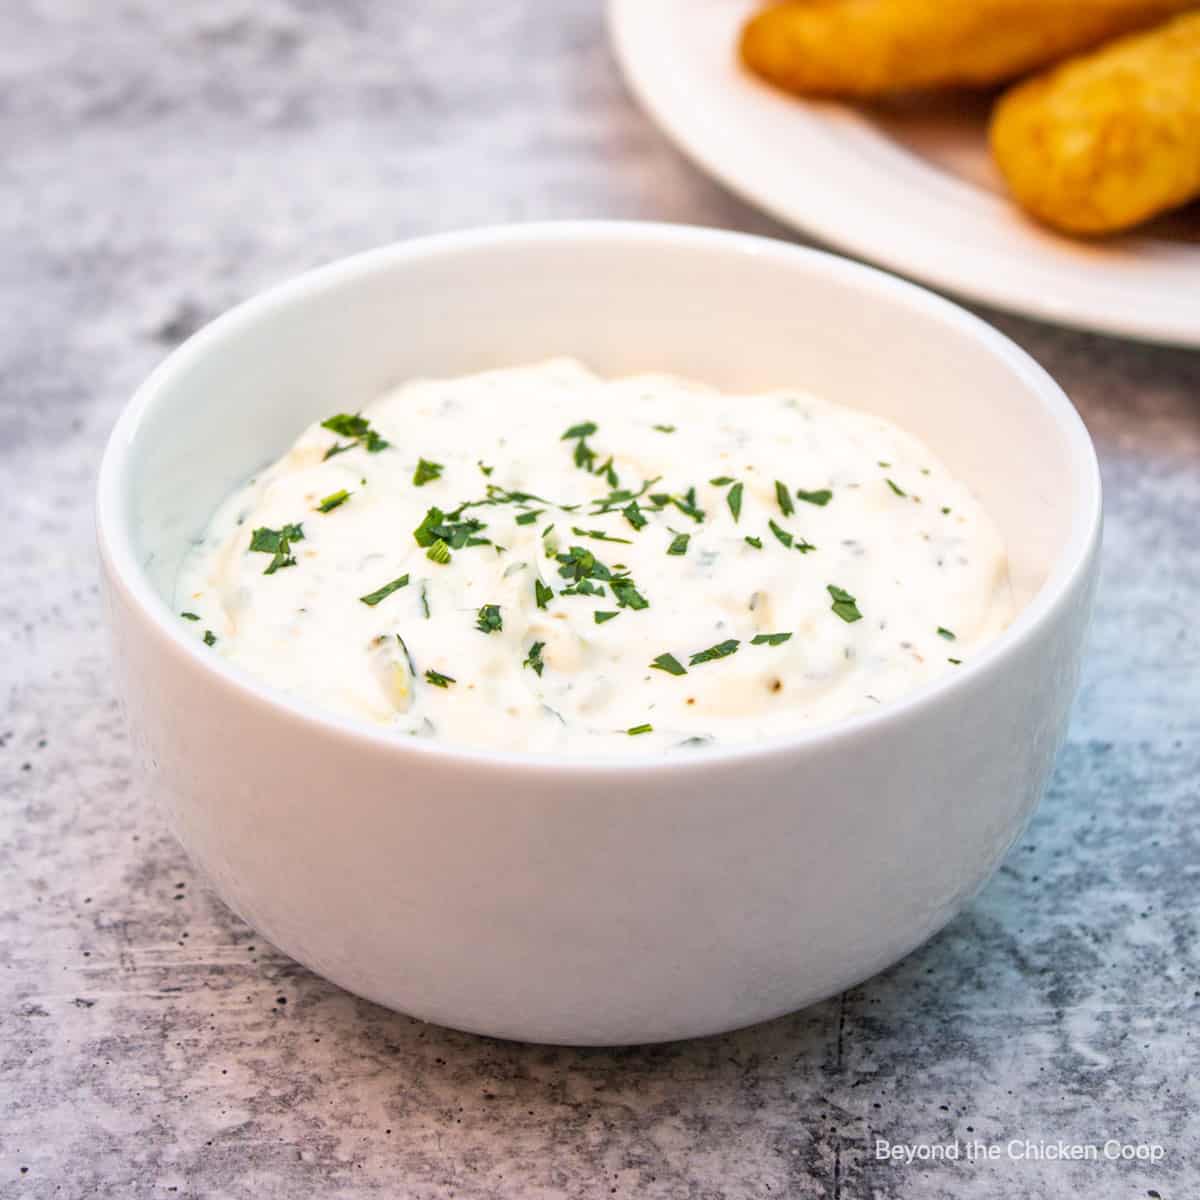 A white bowl filled with a thick sauce.